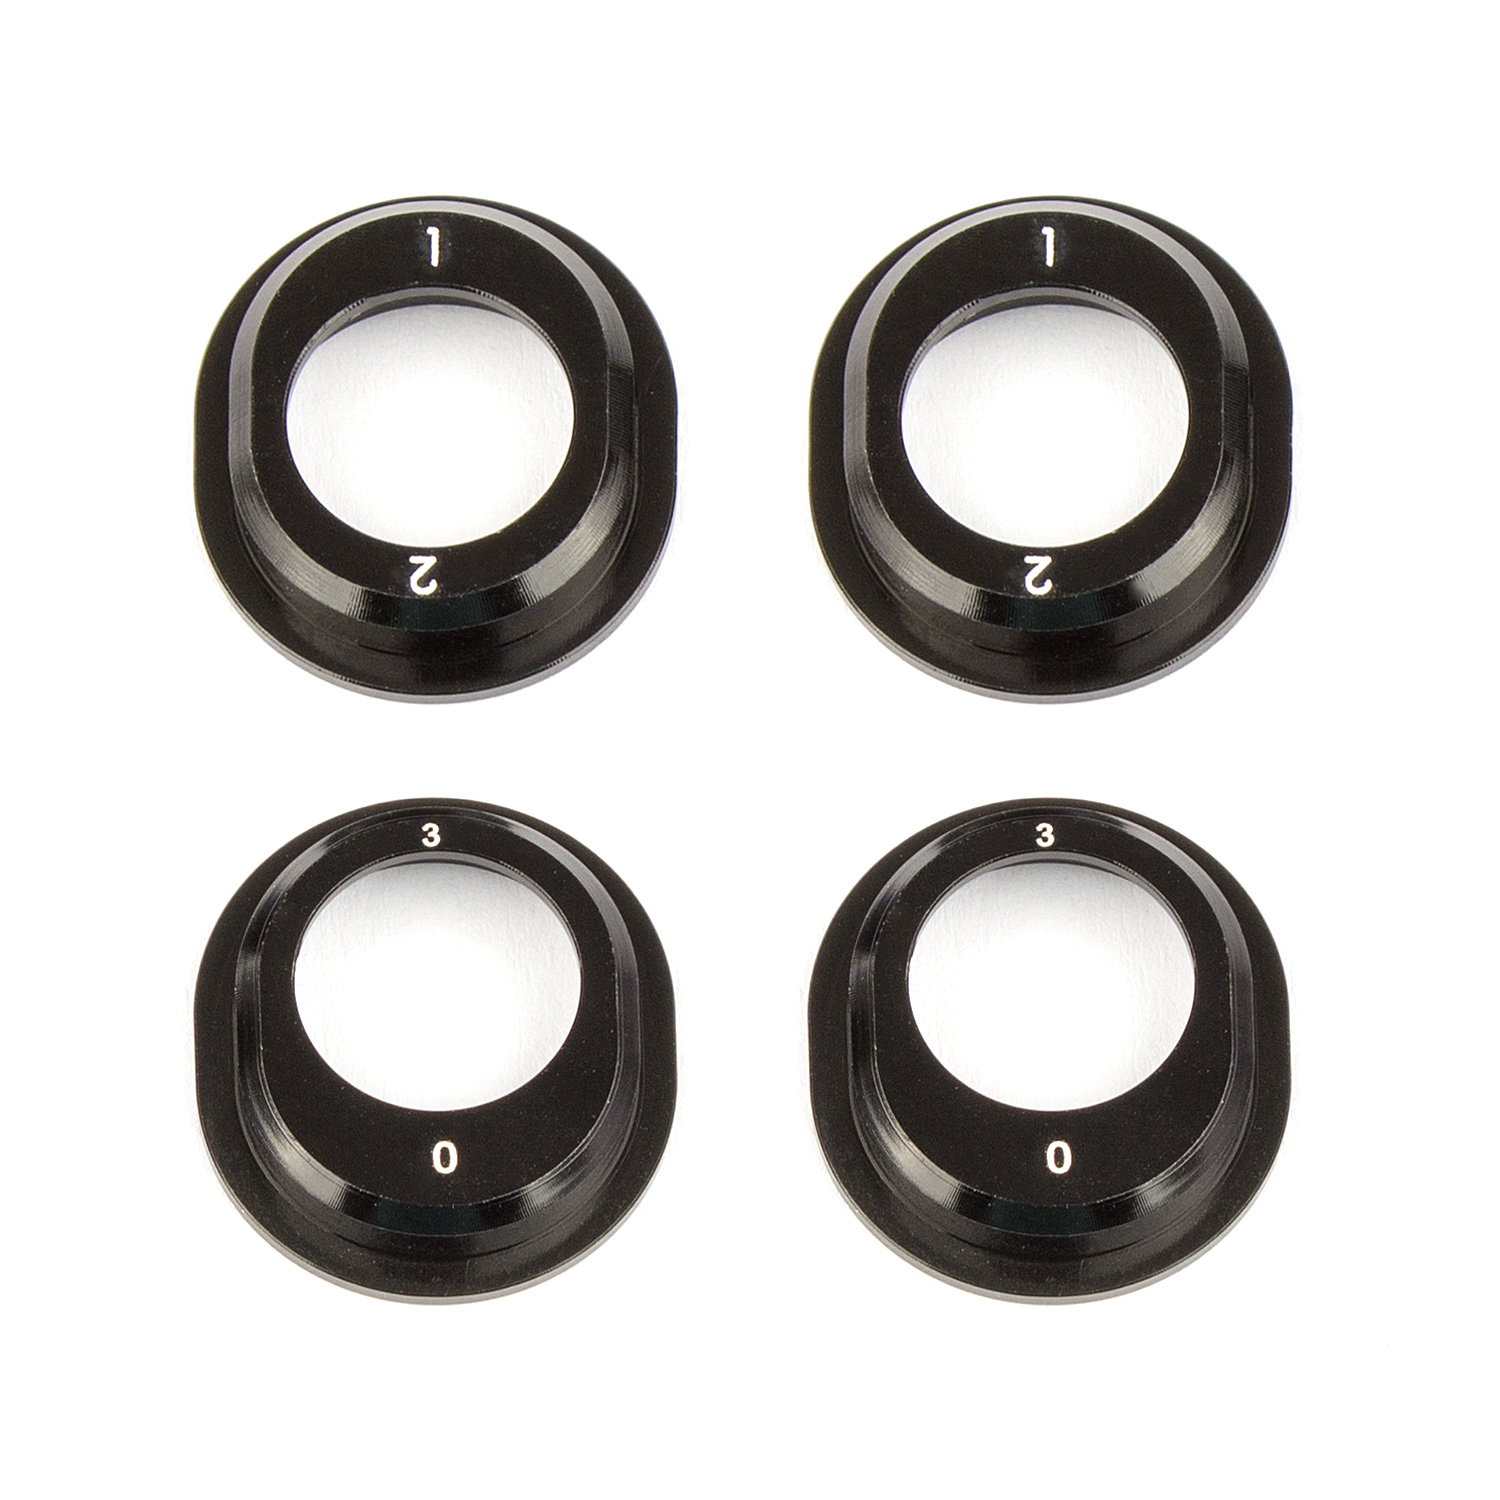 Team Associated Aluminum Differential Height Inserts for B6.1 Black ASC91793